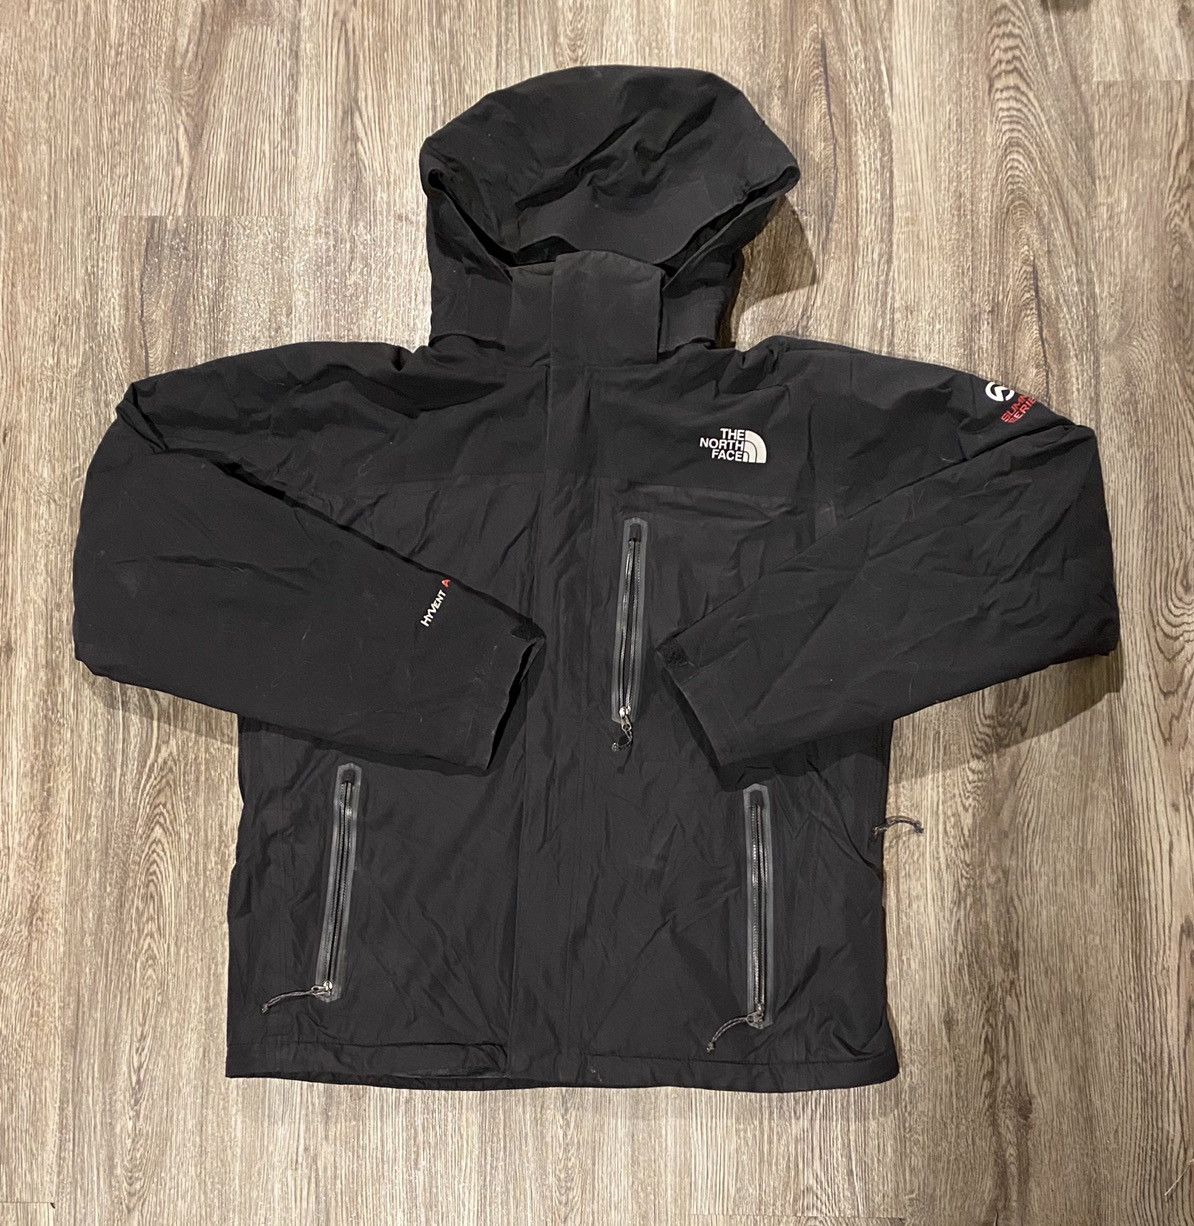 The North Face The North Face Hyvent Alpha Summit Series Jacket | Grailed